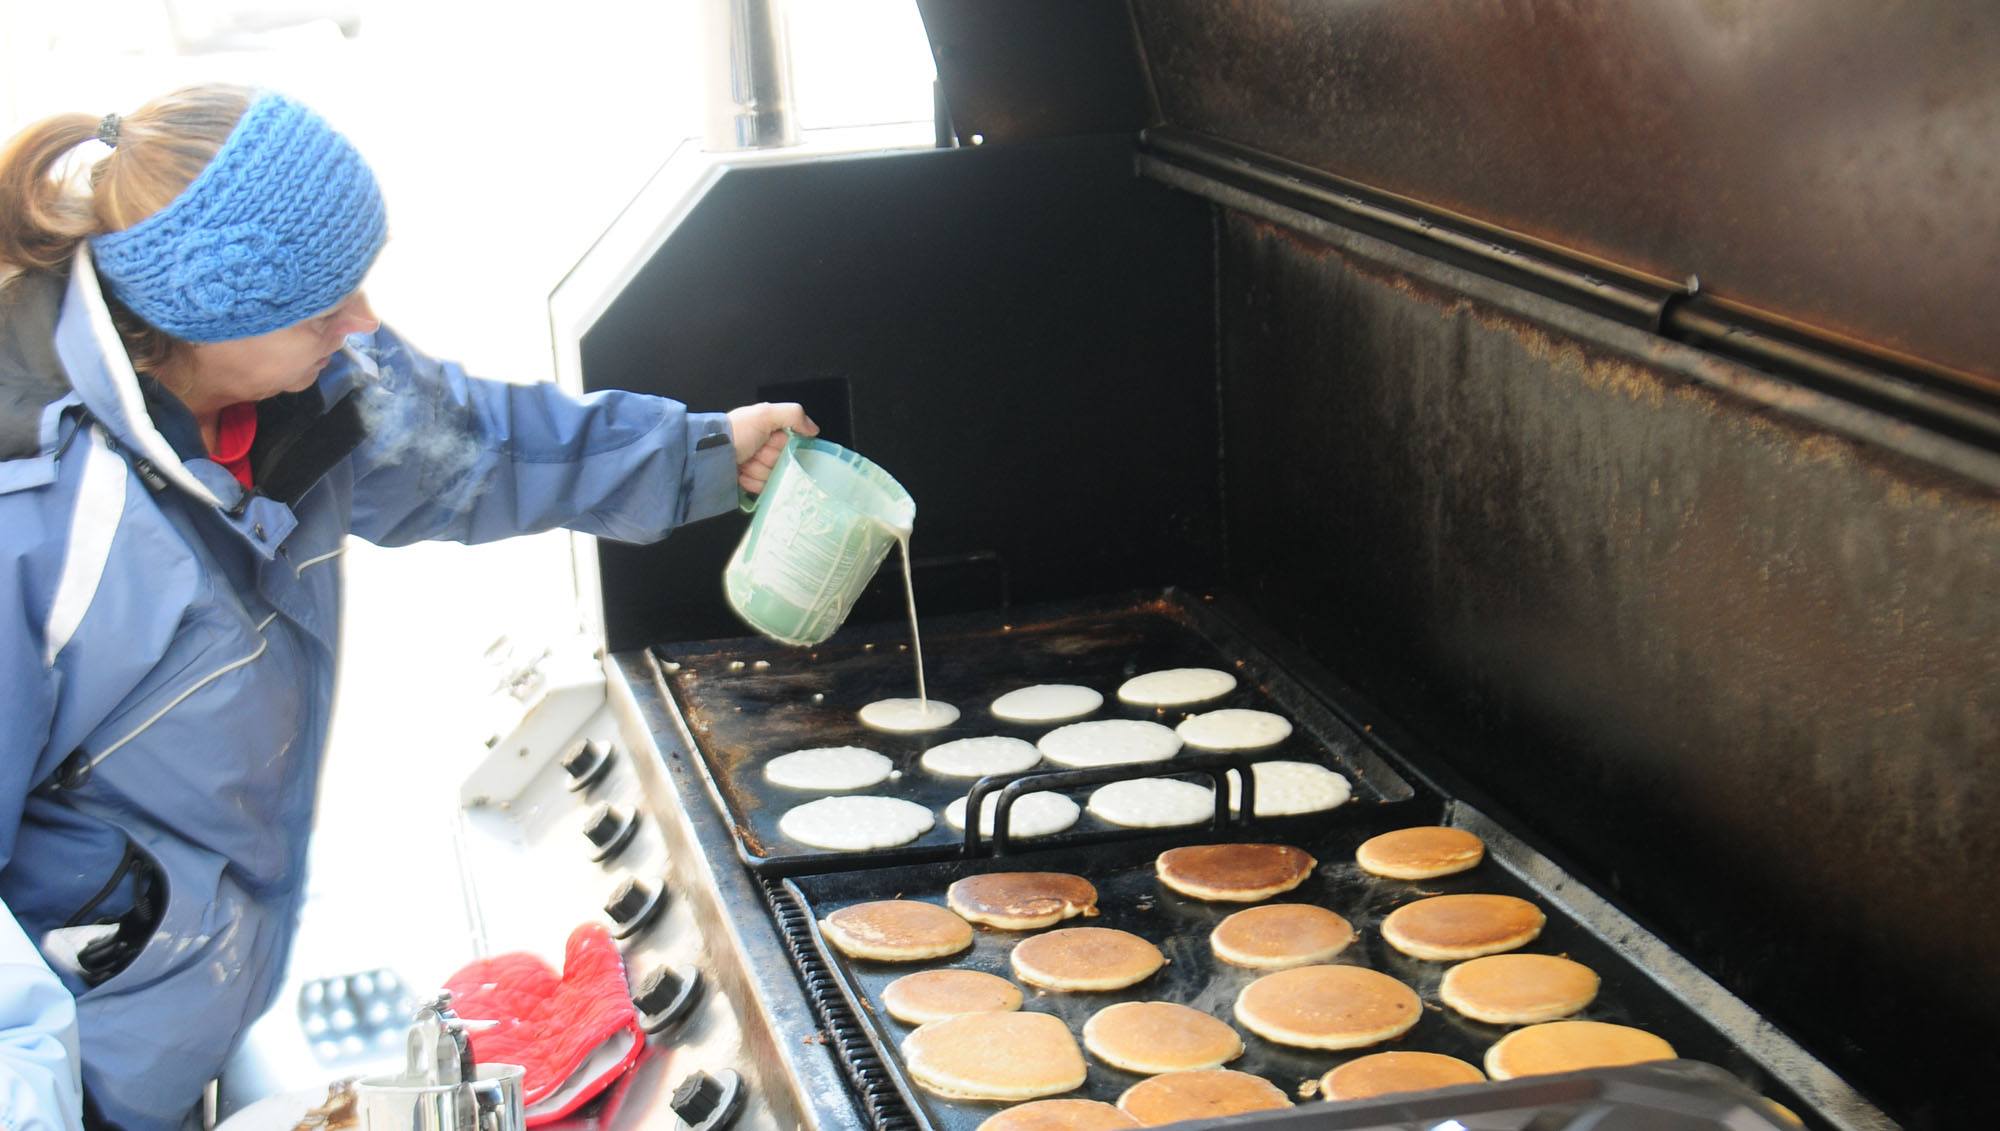 GREAT CAKES- Linda Waschuk pours some pancake batter onto a grill this past week for over 700 students and parents to bring awareness to Shrove Tuesday